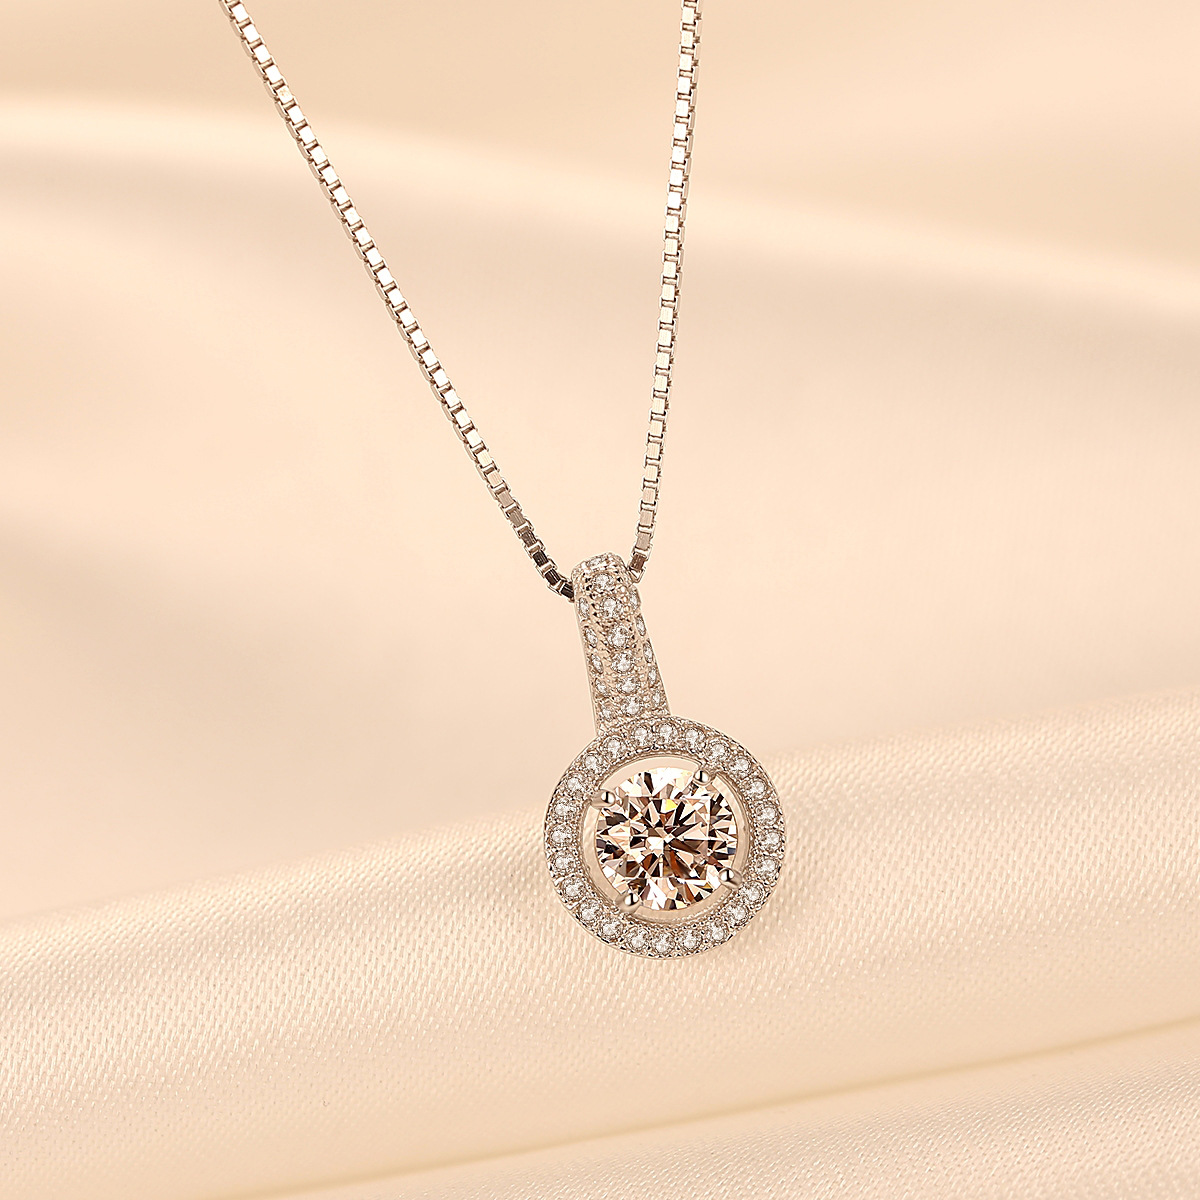 Micro Cz Crystal Pendant Sterling Silver Necklace